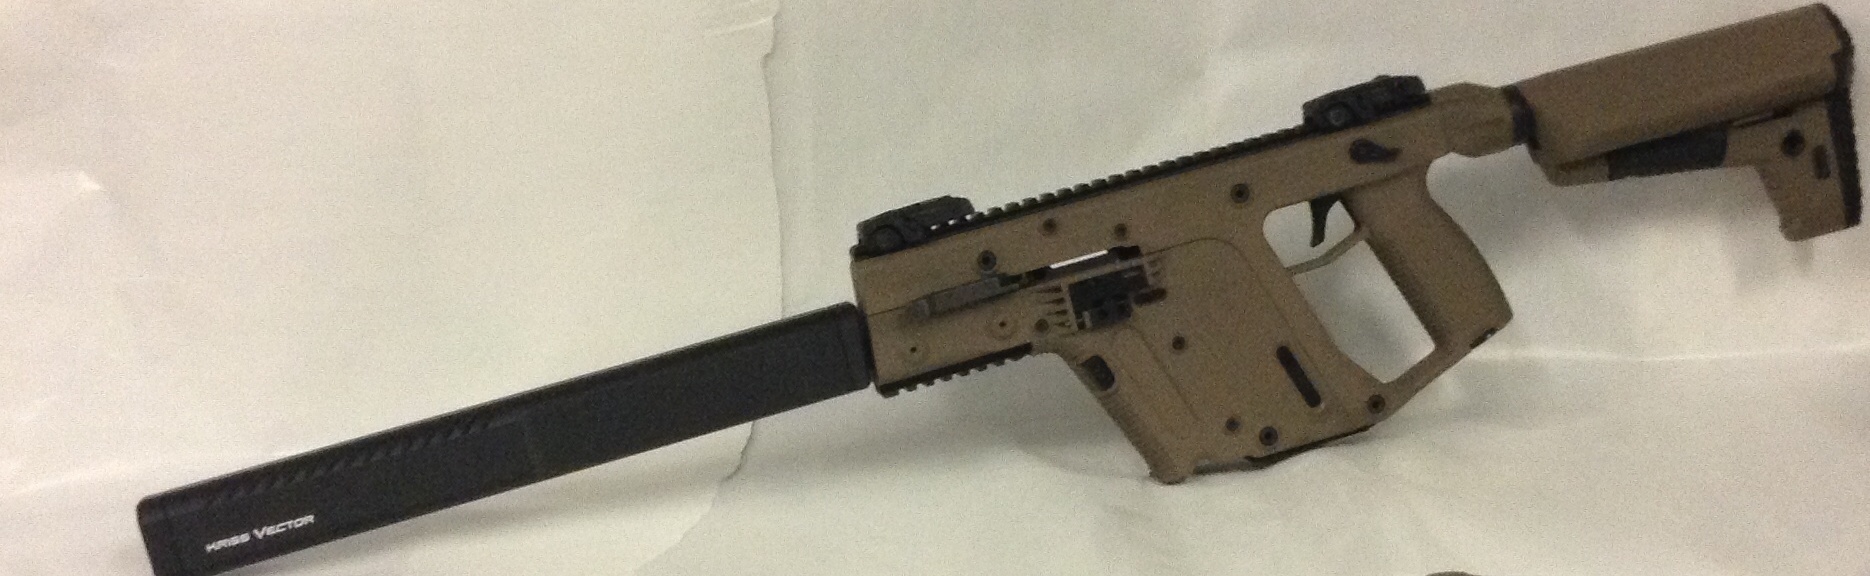 Kriss vector 9mm Non Restricted G2 FDE